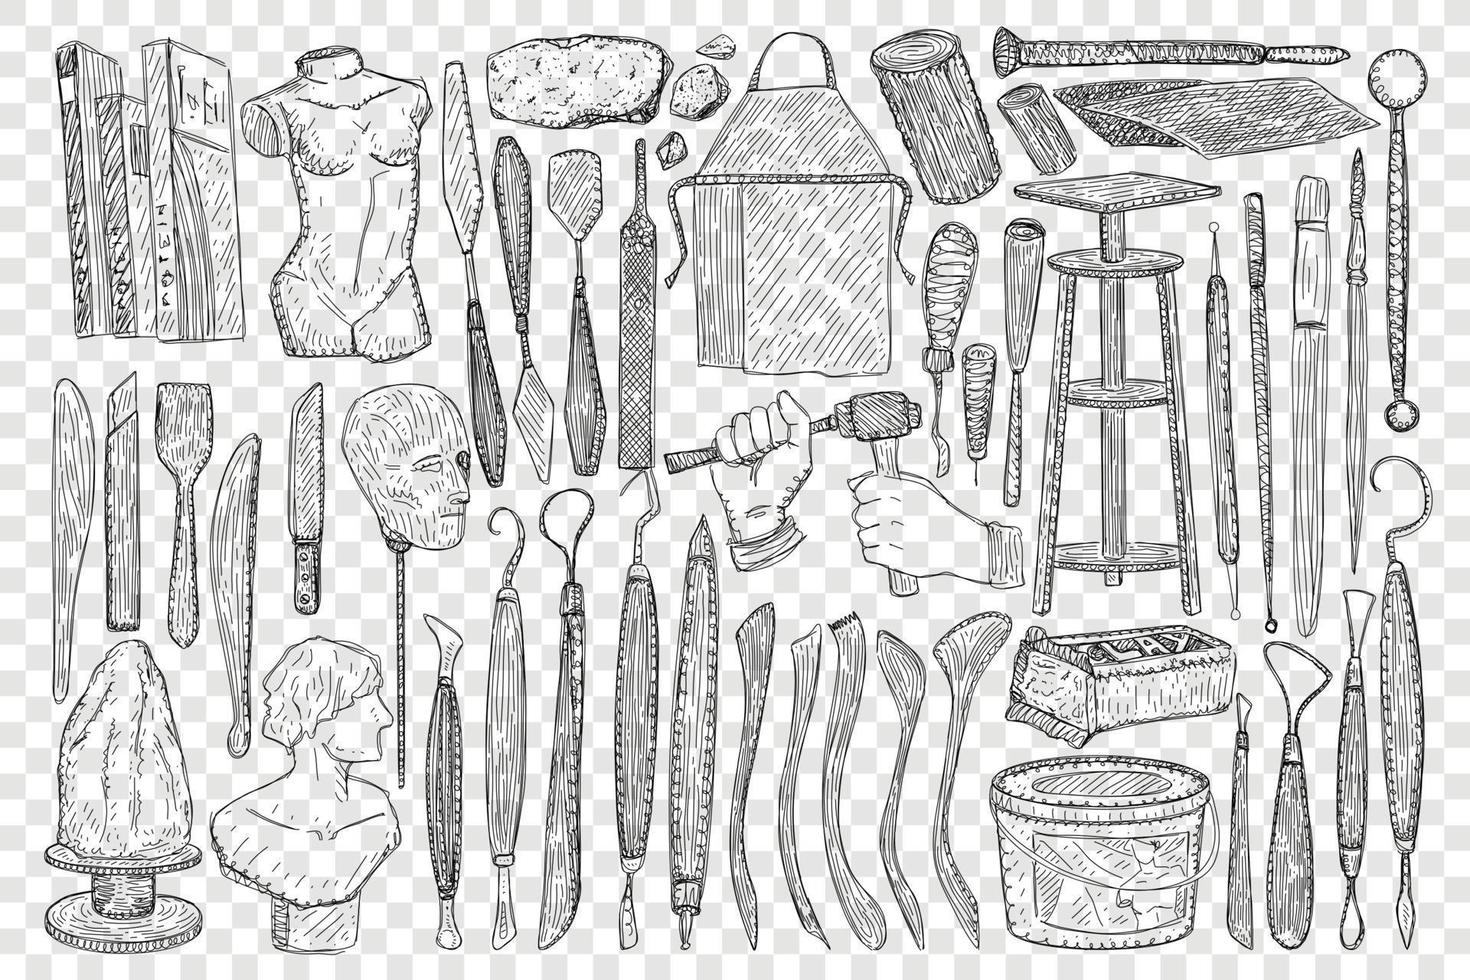 Tools for sculpture doodle set. Collection of hand drawn equipment stone scapula stools and hammers for making handmade sculpture isolated on transparent background vector